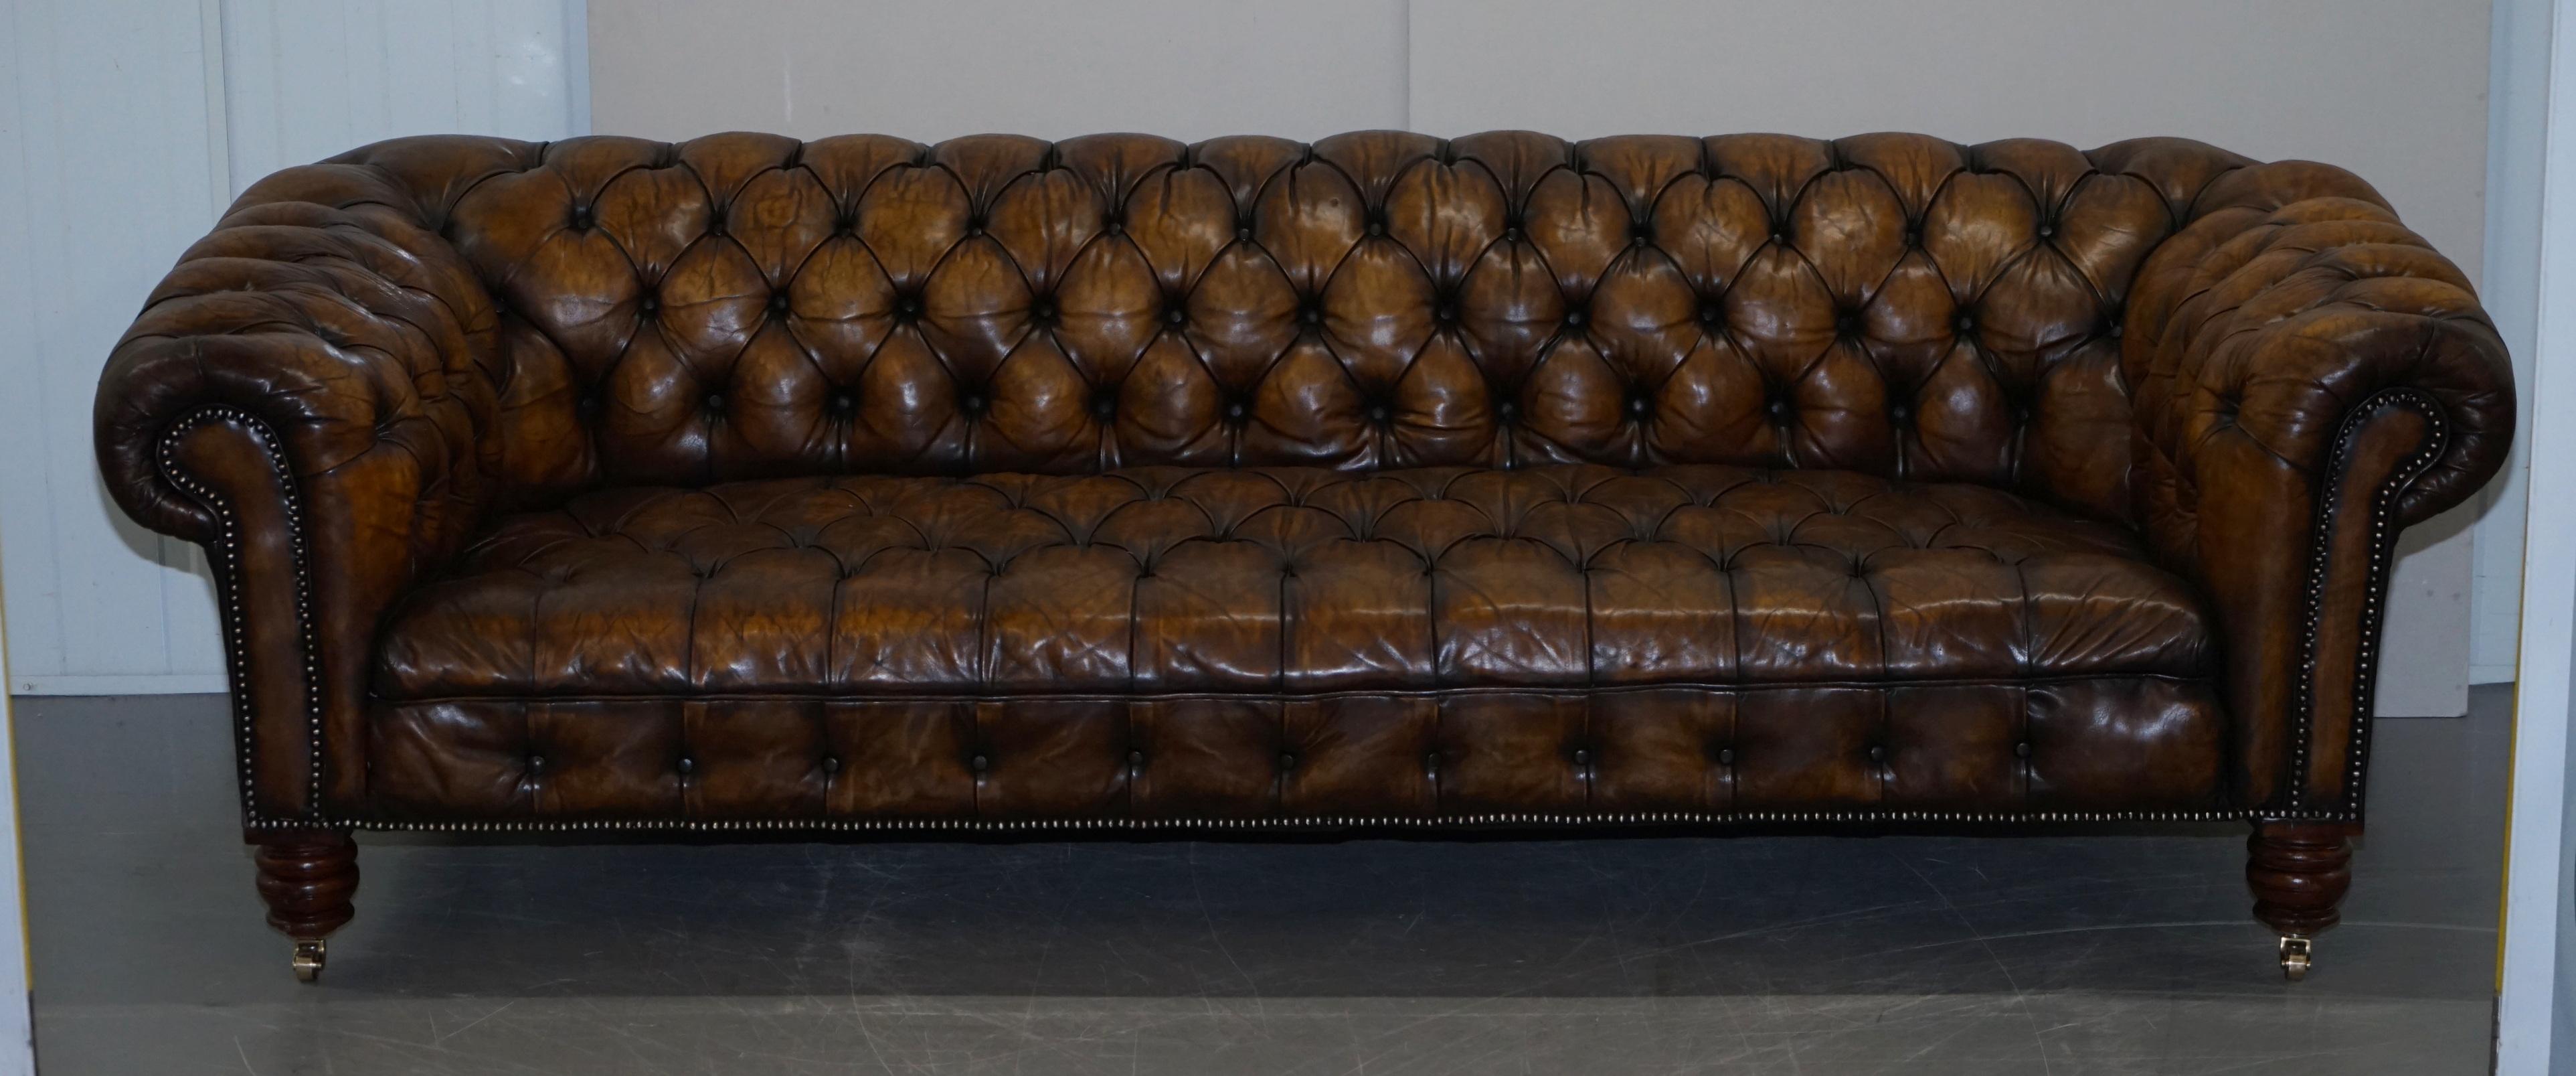 We are delighted to offer for sale this very rare fully restored circa 1860 hand dyed cigar brown leather Chesterfield sofa with original horse hair padding, coil sprung all over and mahogany turned legs with brass castors 

This sofa is a very